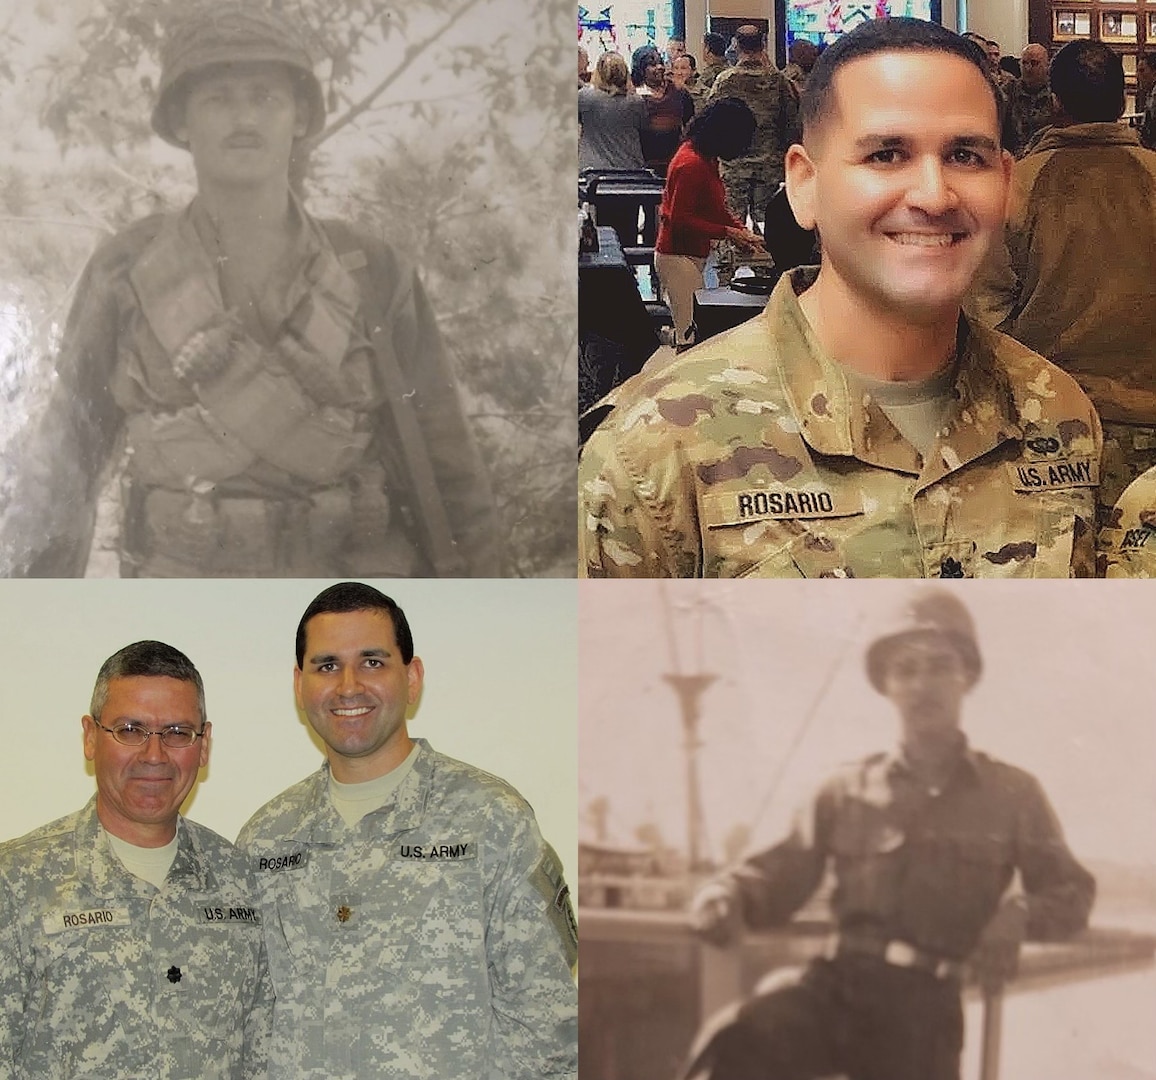 A photo collage of Lt. Col. Rosario and his family.